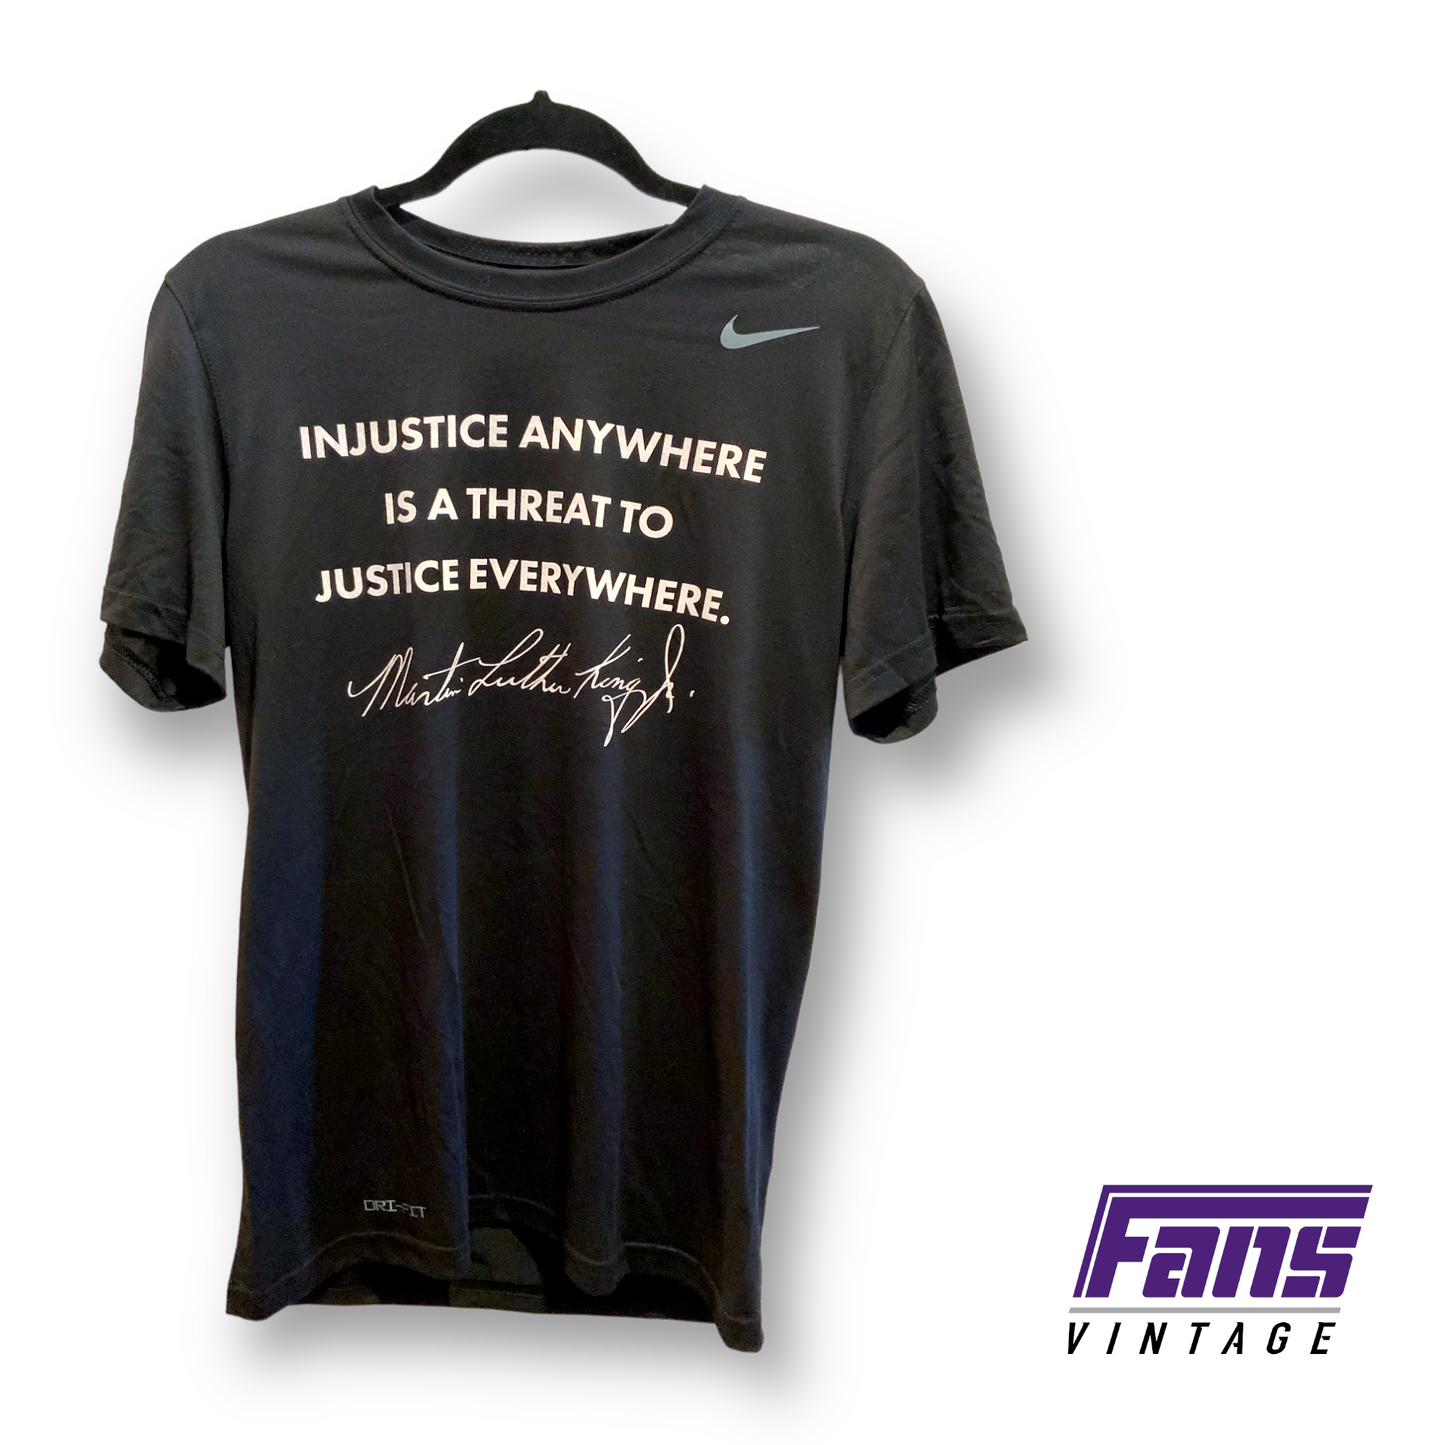 TCU Basketball Team-Issued MLK Quote Tee - New with tags!